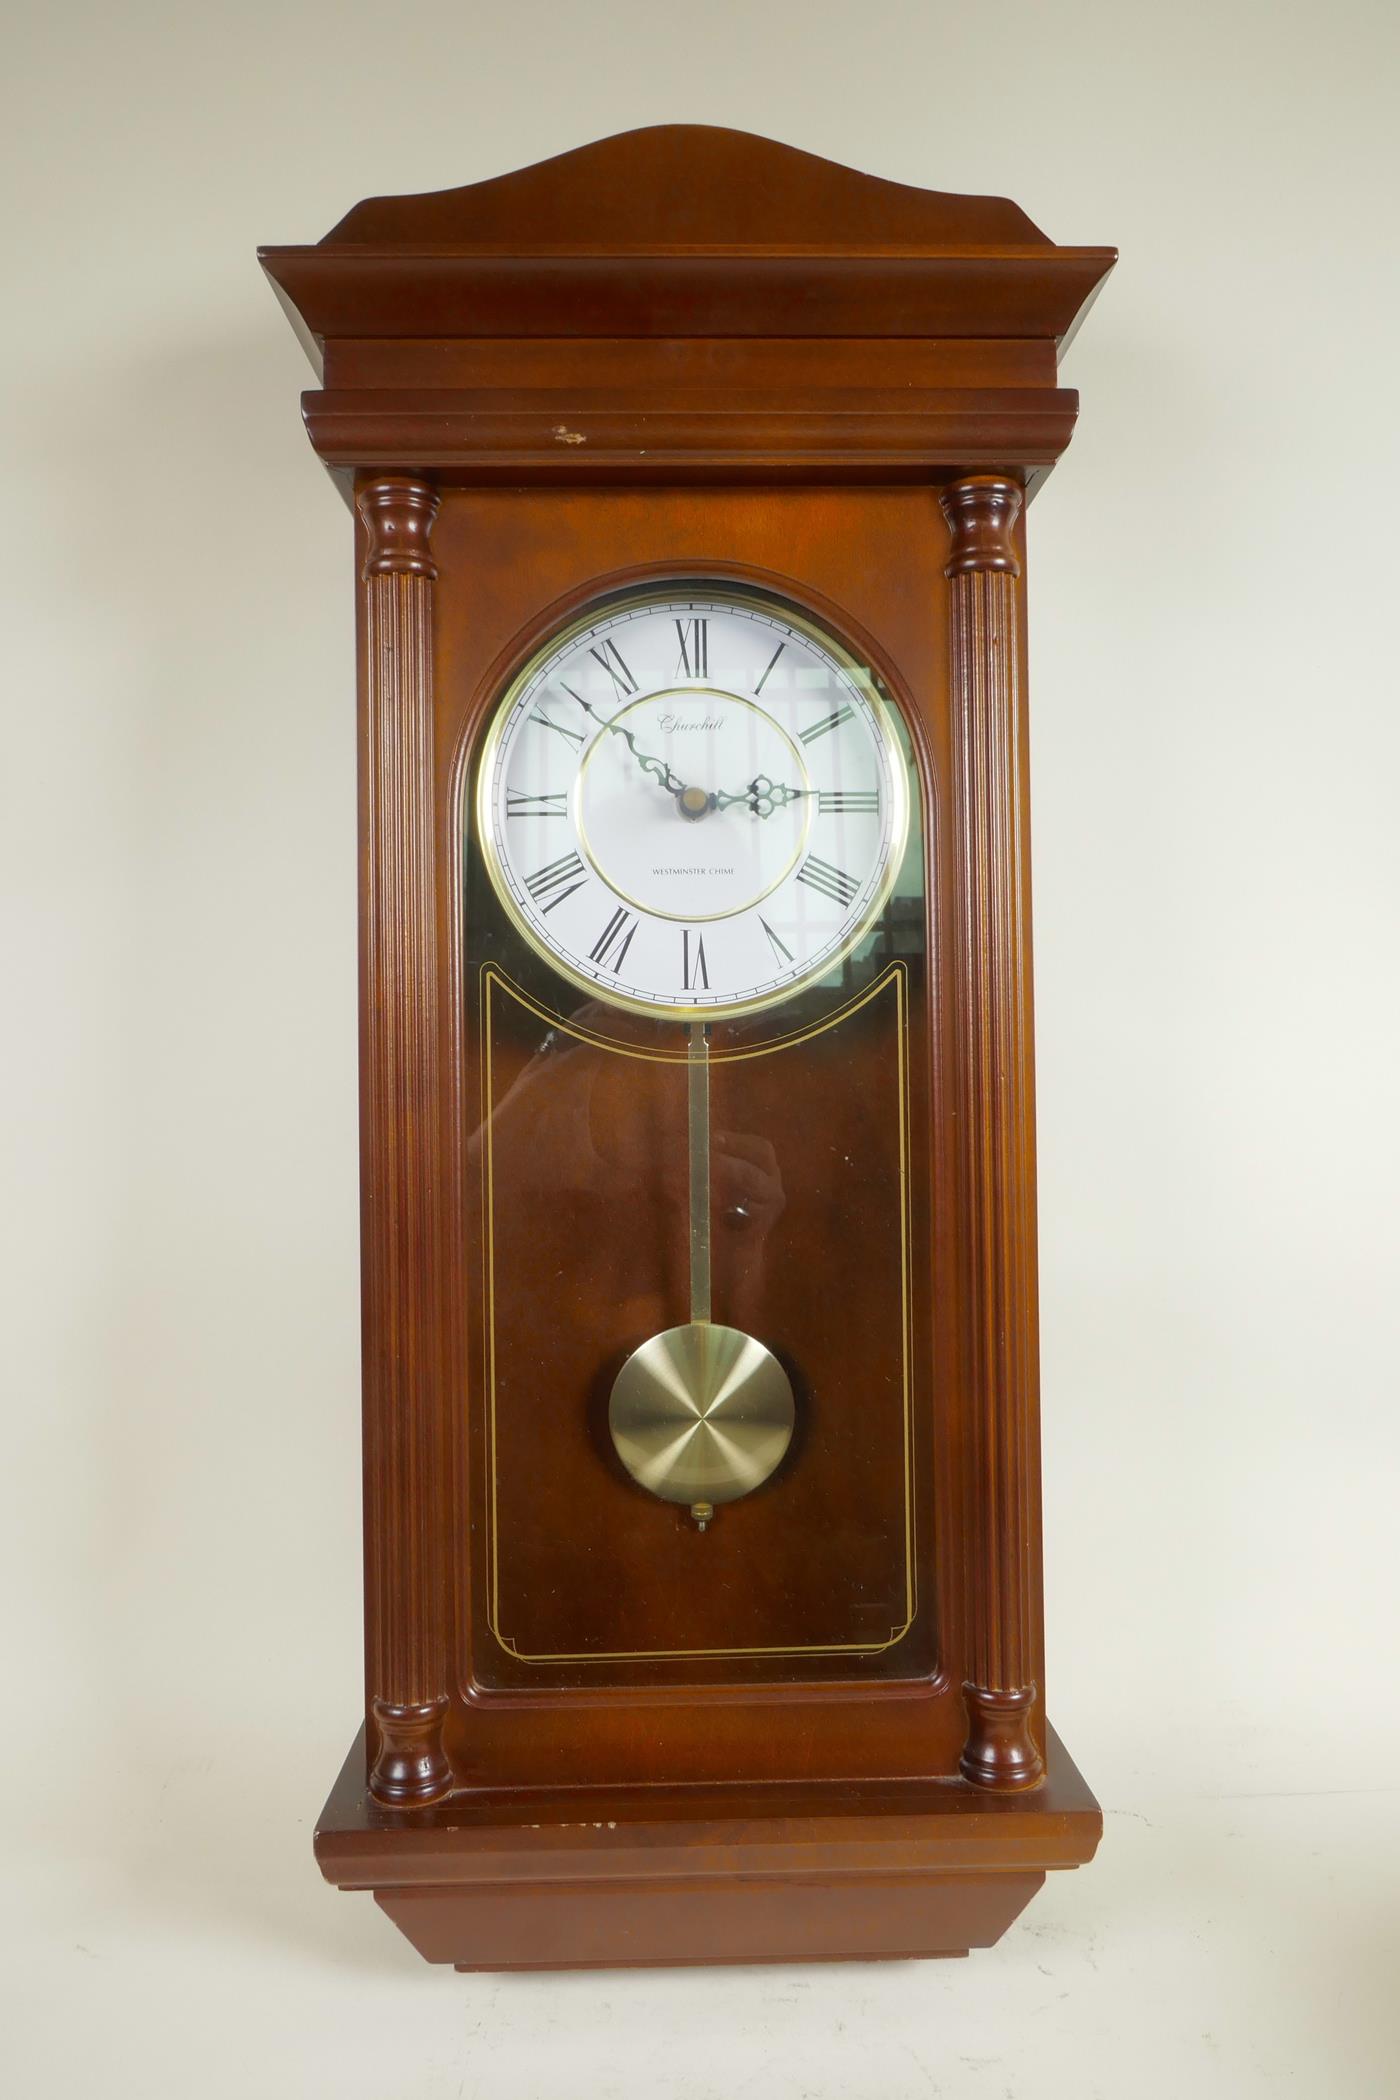 A mid C20th Smith's Enfield chiming mantel clock, dark wood effect bakelite casing and silver - Image 2 of 7